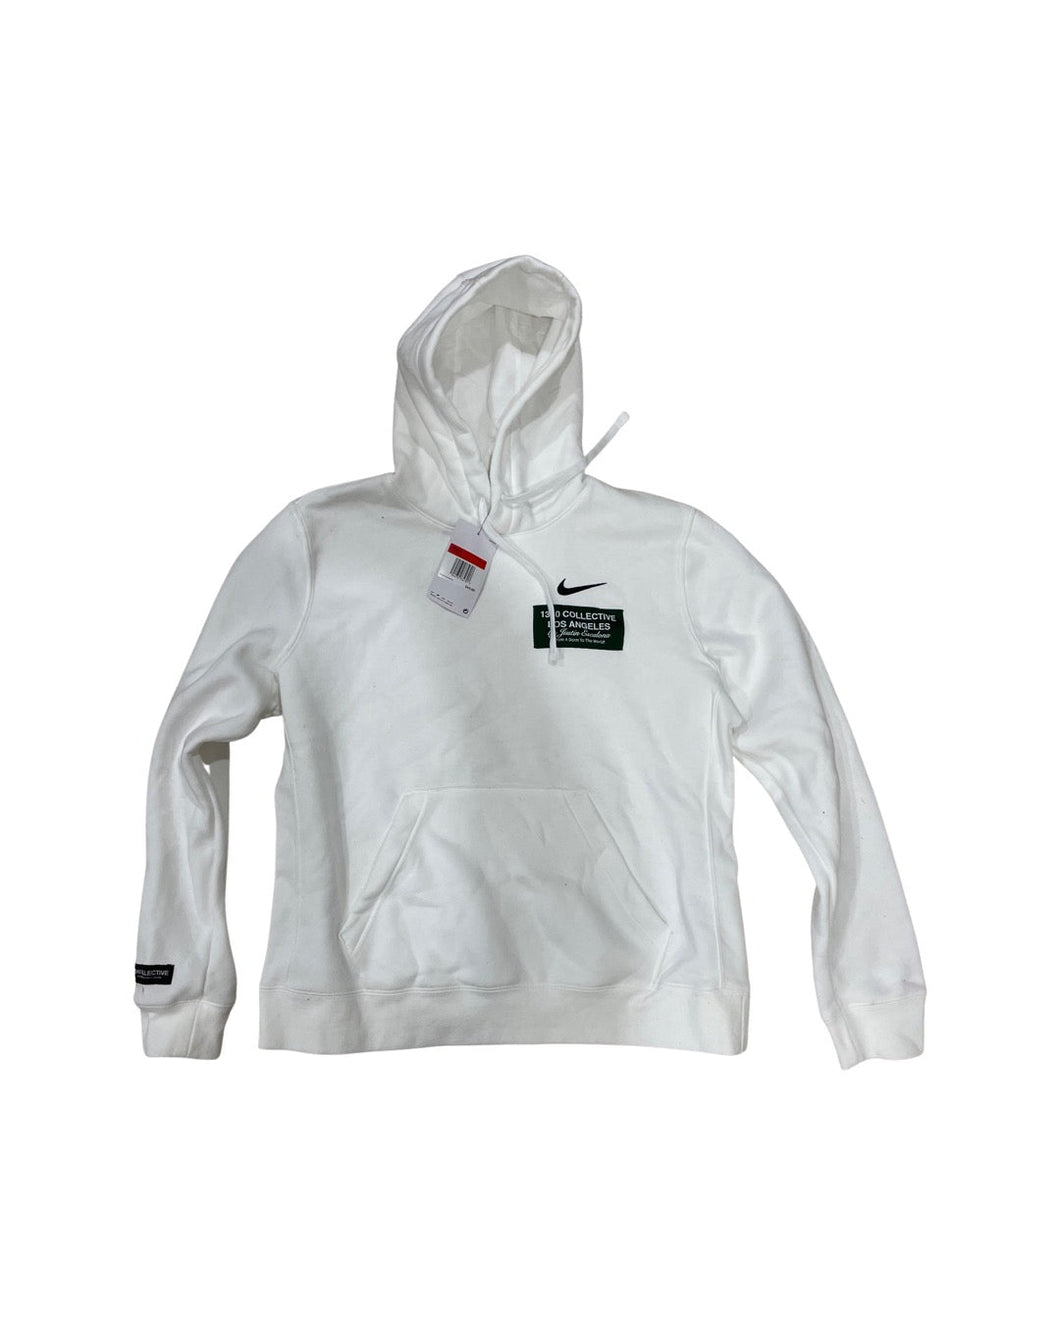 1340 PATCH - WHITE NIKE HOODIE (black friday 2022) Womens Large fits Men's Small